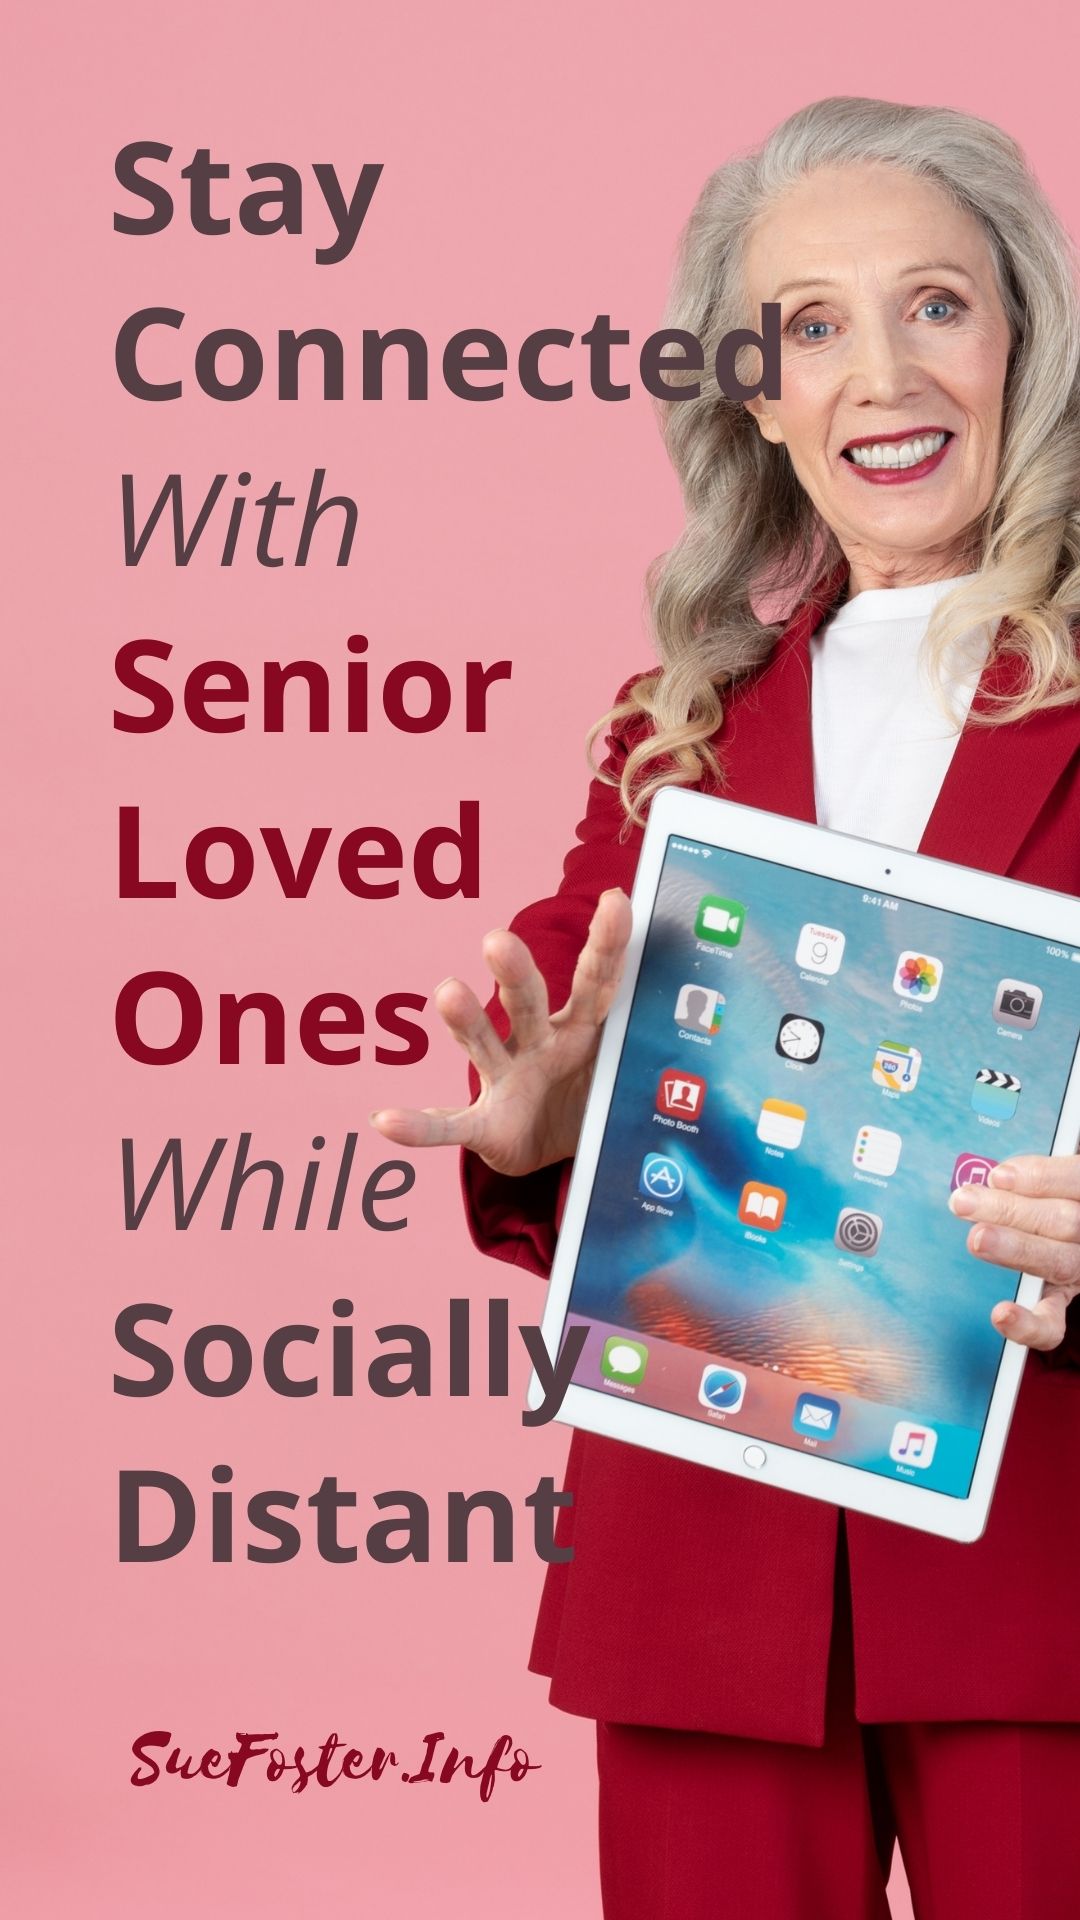 Here are ways to show your support to ageing loved ones while staying physically distant.